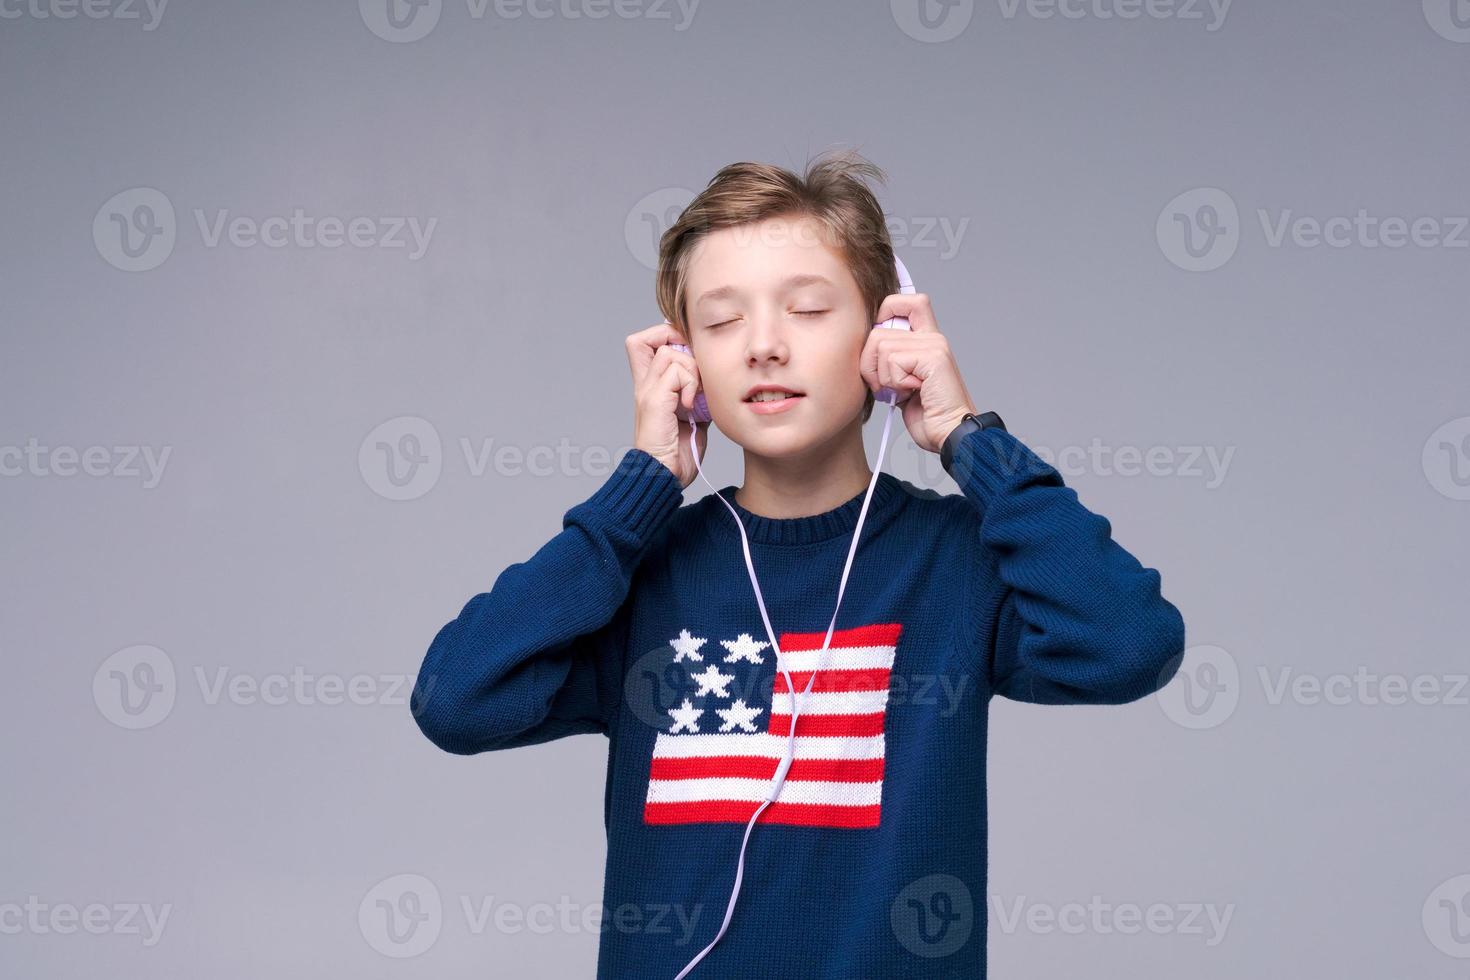 Joyful guy in wired headphones listens to music in blue sweater with us flag photo